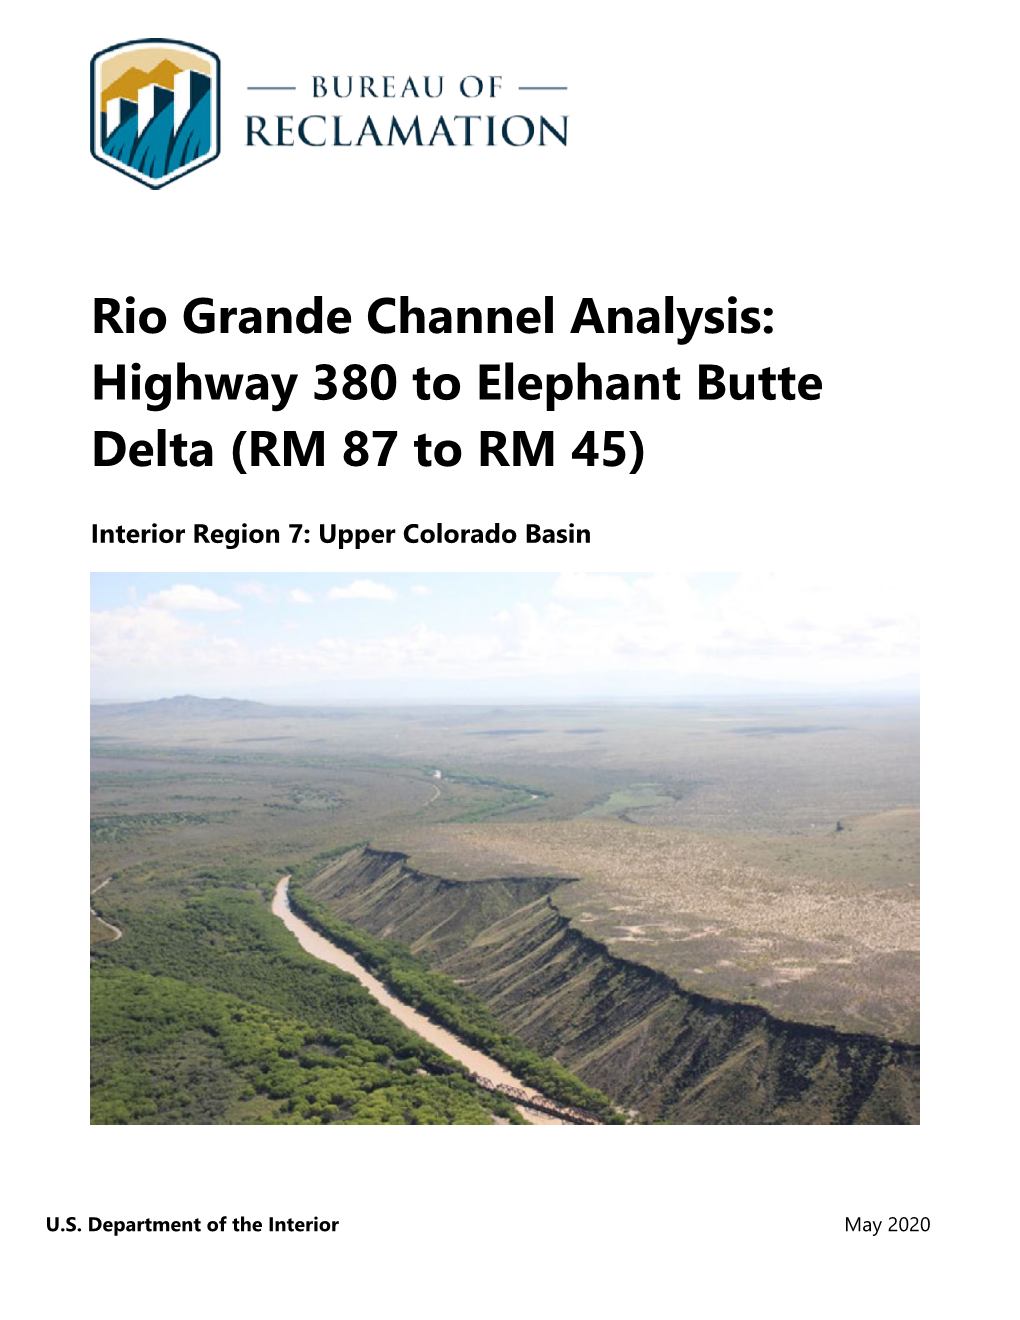 Rio Grande Channel Analysis: Highway 380 to Elephant Butte Delta (RM 87 to RM 45)